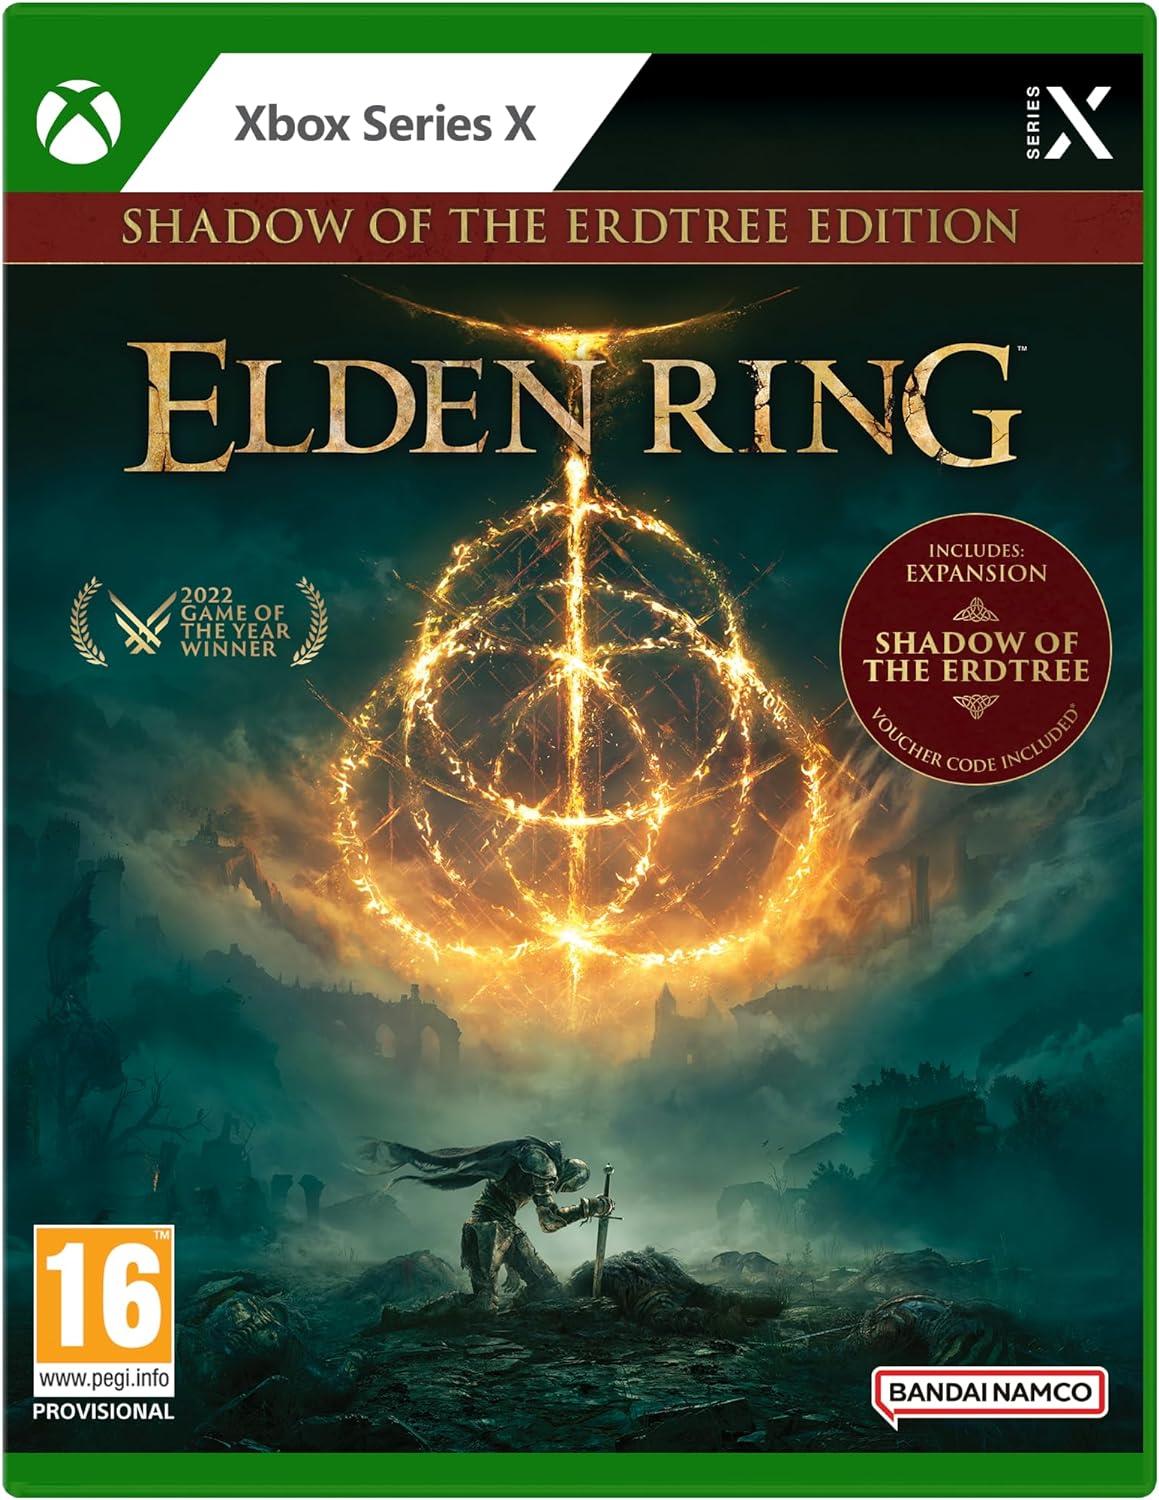 Elden Ring: Shadow of the Erdtree Edition Xbox Series X Game